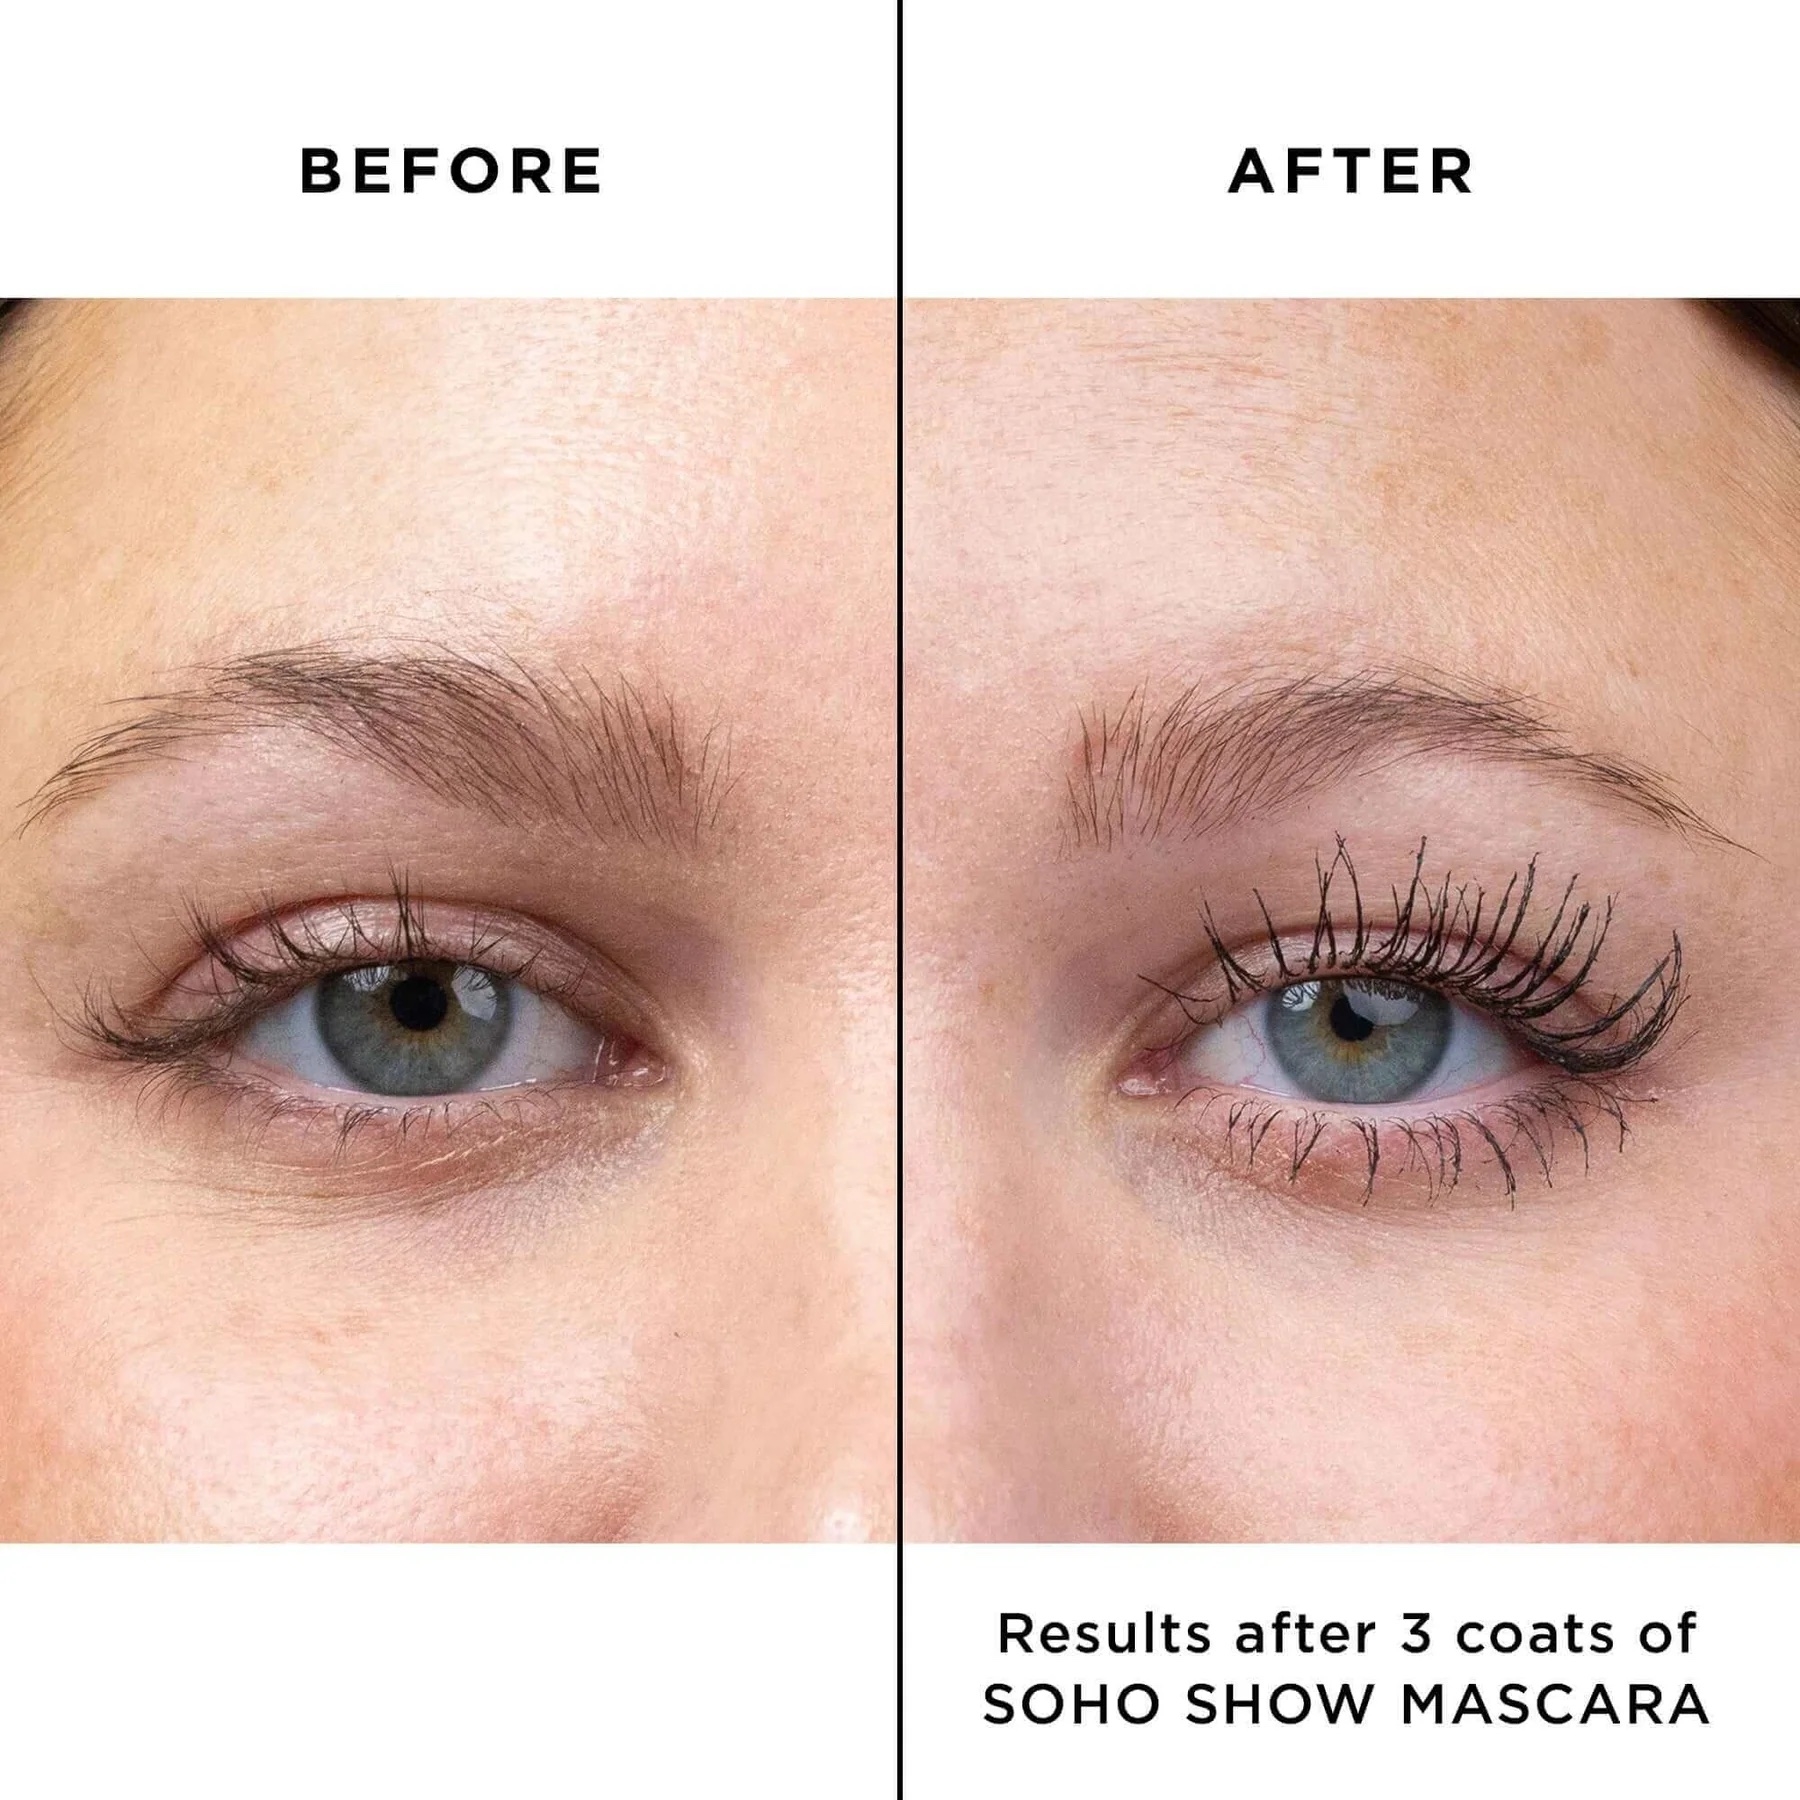 A before and after photo of a model using the mascara